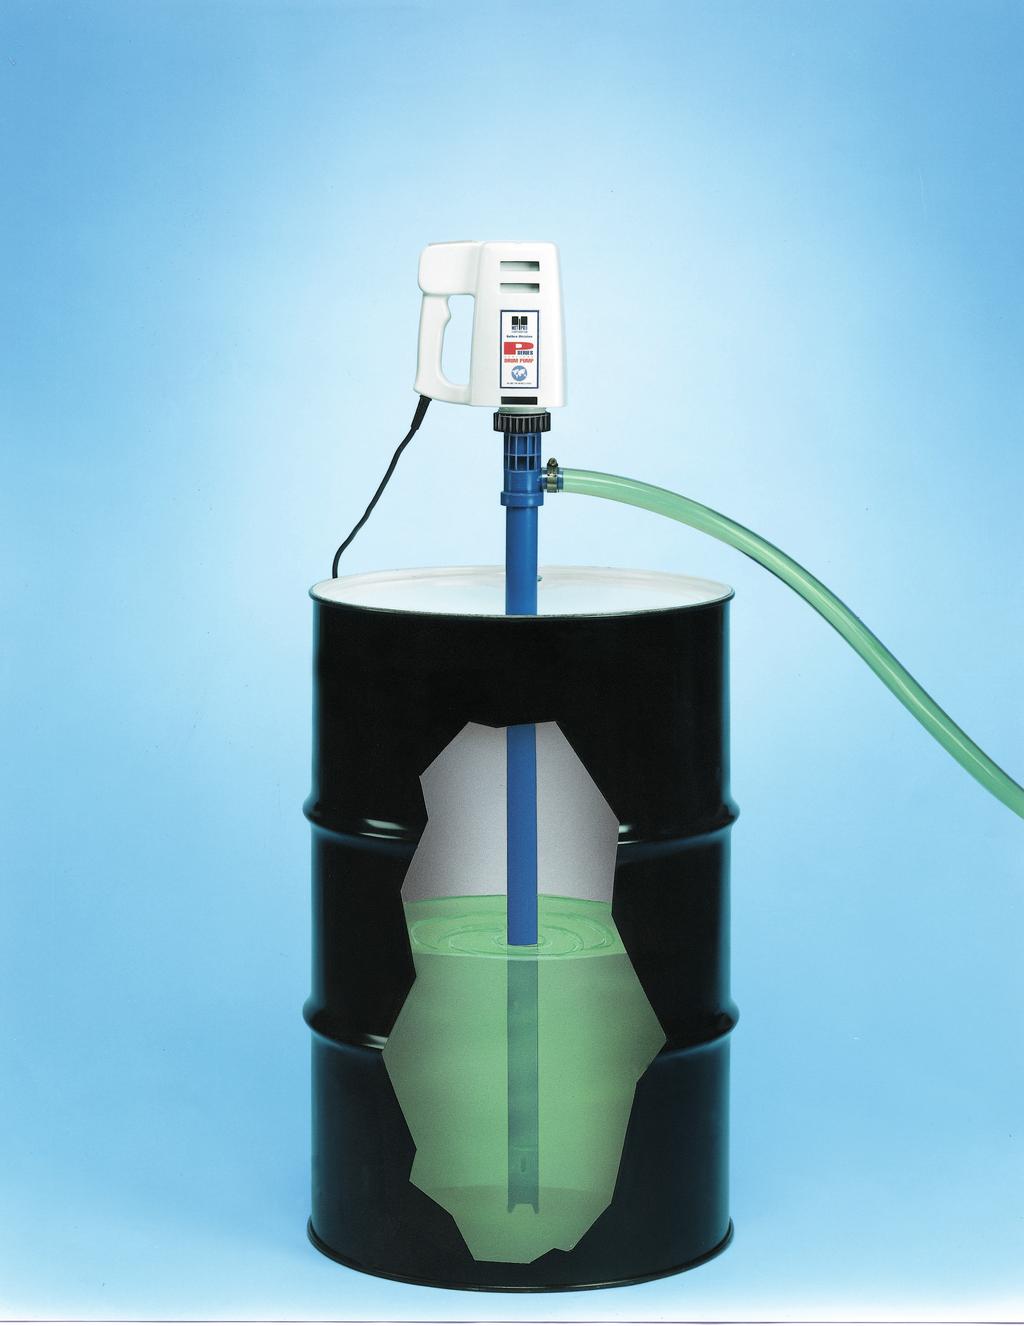 SETHCO MODEL P-90 DRUM PUMPS THE RIGHT CHOICE FOR TRANSFERRING CORROSIVE LIQUIDS FROM CARBOYS, DRUMS, VATS, TANKS OR ANY OTHER CONTAINER Pump Tube Features: Motor Features: Polypropylene, Kynar or